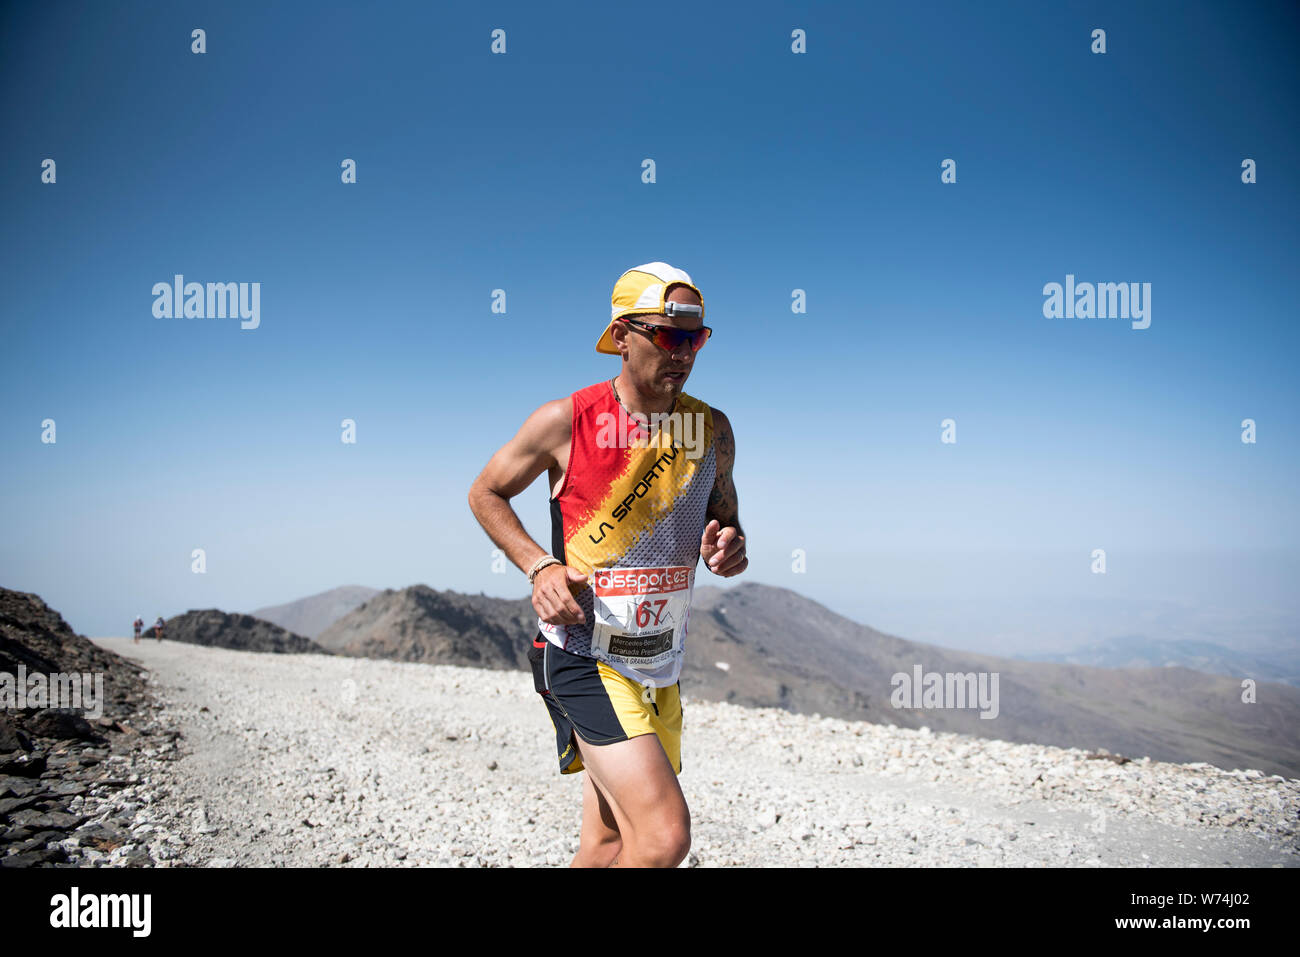 Competitor runs during the race held Sierra Nevada.The Granada-Pico Veleta international ascent one of toughest ultra-endurance in the world held in Sierra Nevada. 50 kilometers from the city